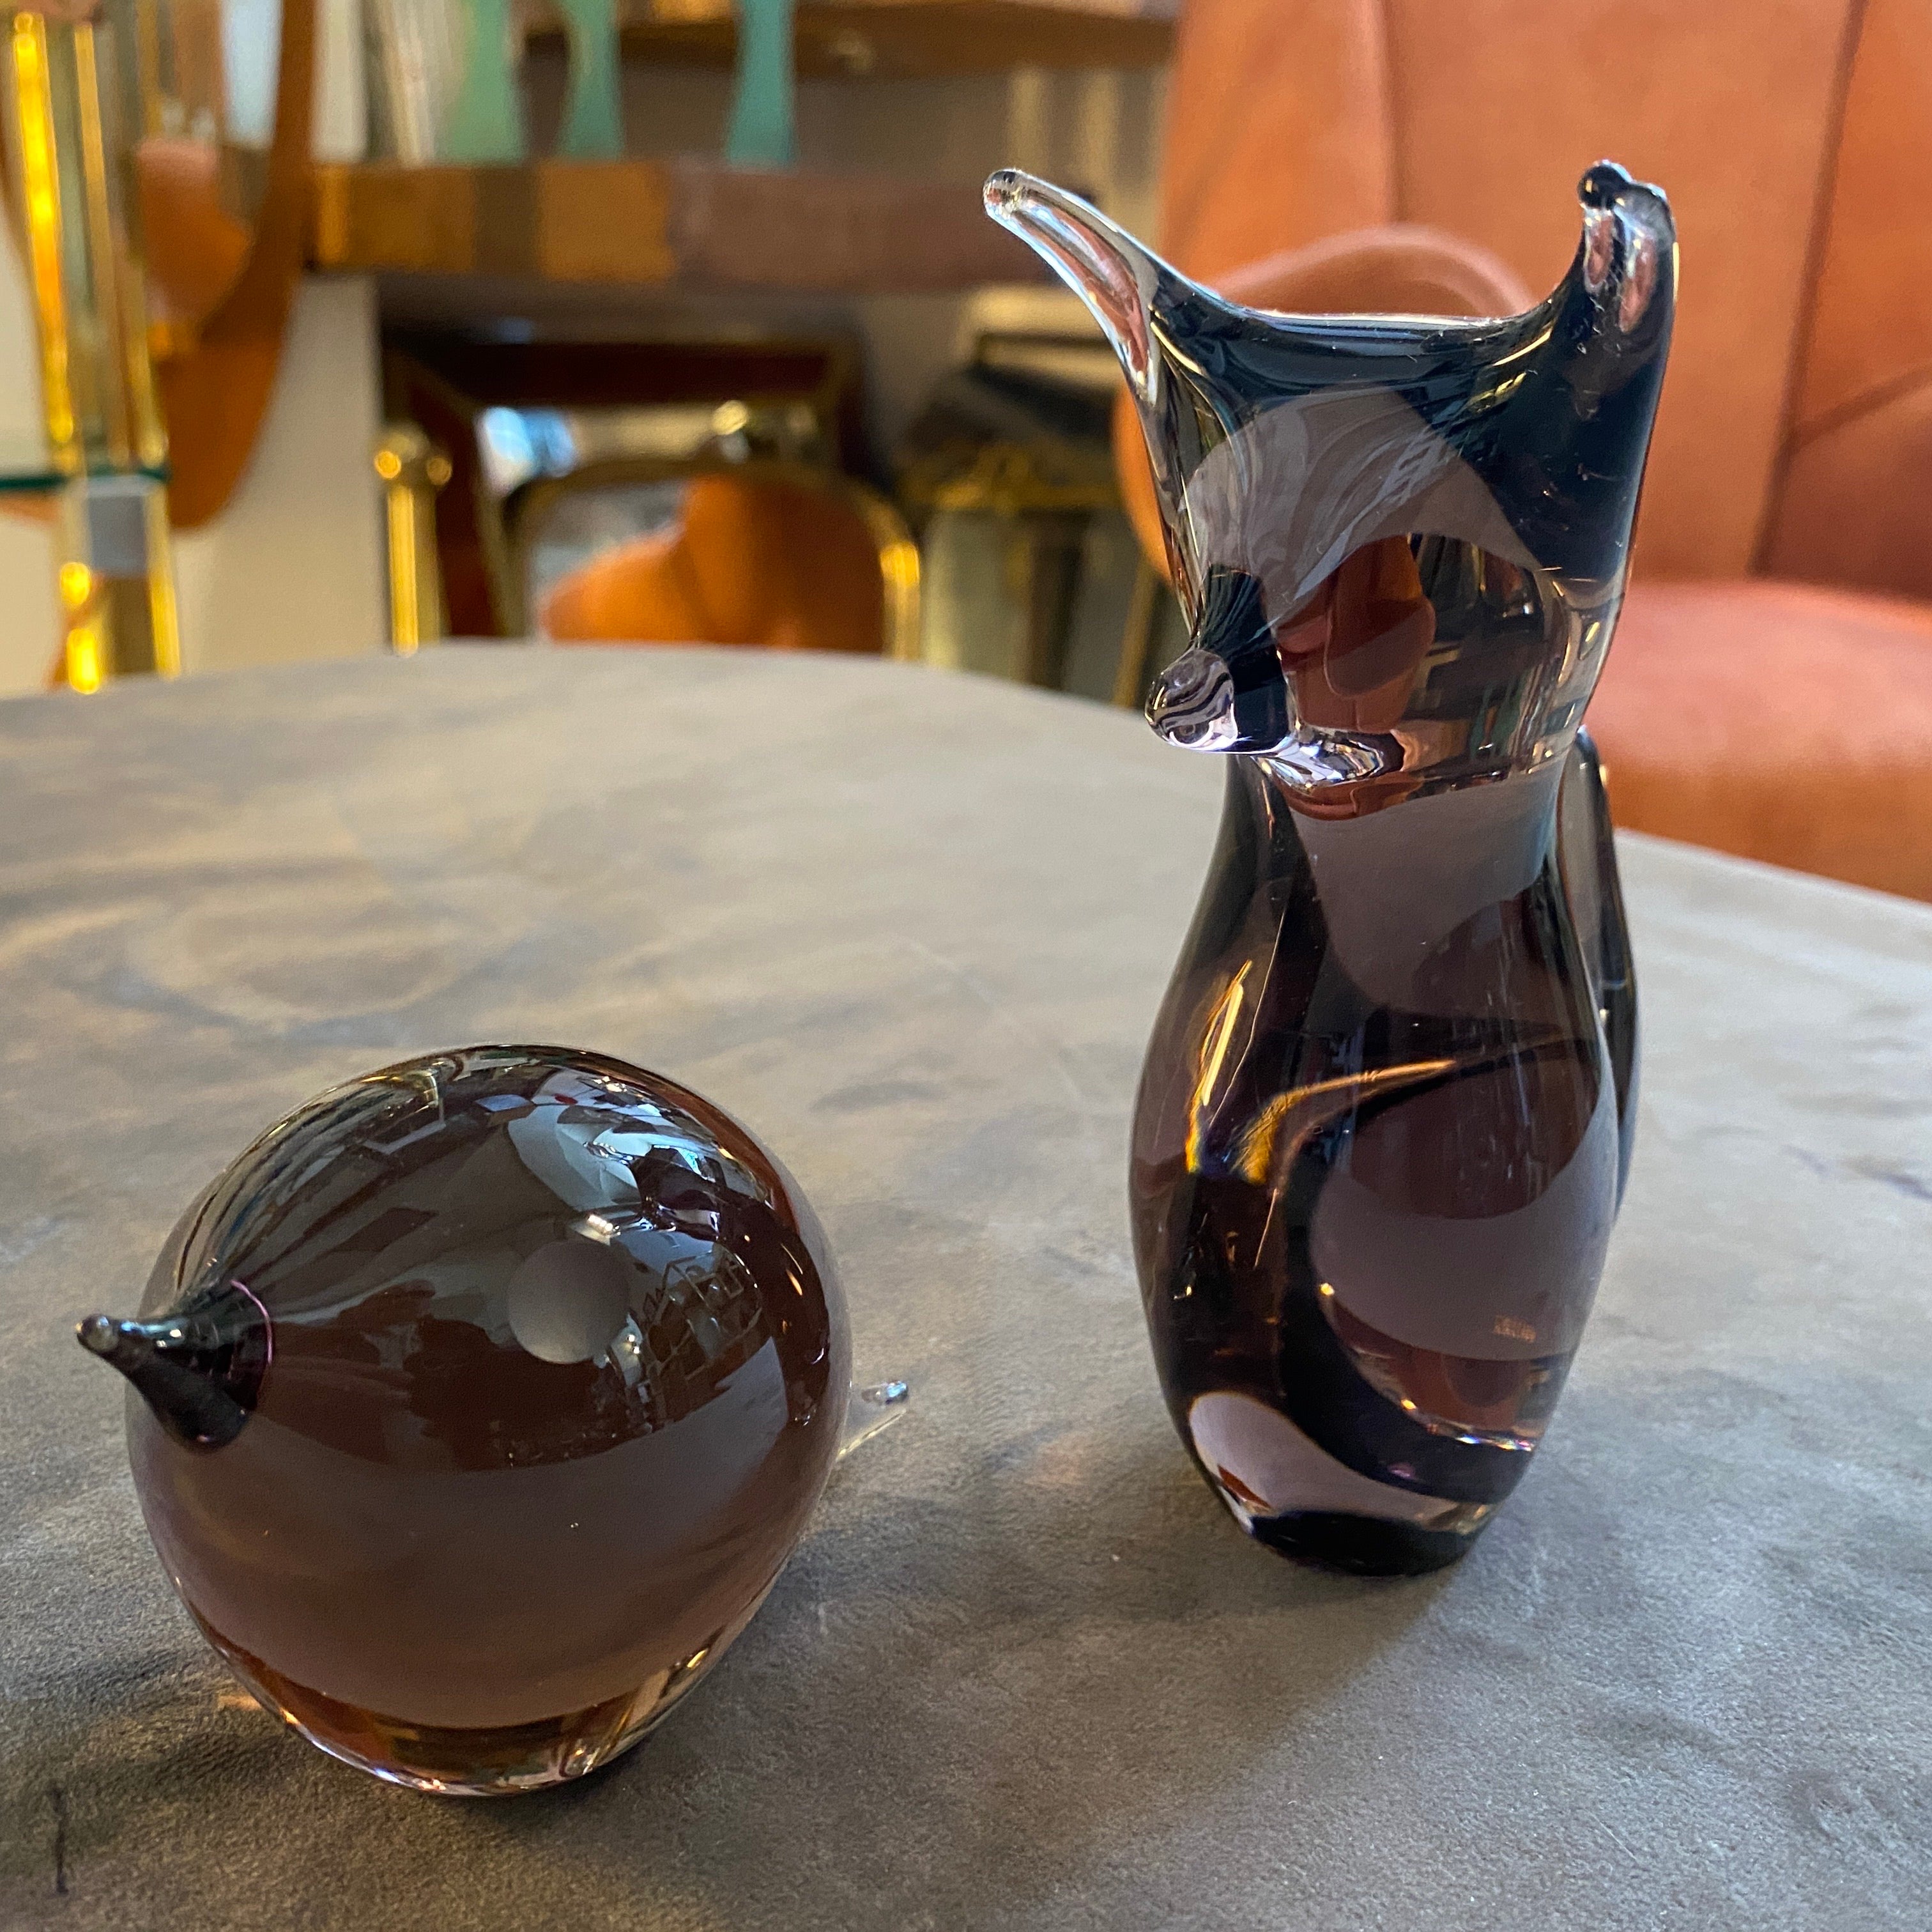 The 1980s Figures of a Cat and a Mouse exemplify the fusion of artistry and craftsmanship synonymous with Murano glassmaking traditions. Created in the 1980s, these pieces showcase the contemporary interpretation of classical forms through a